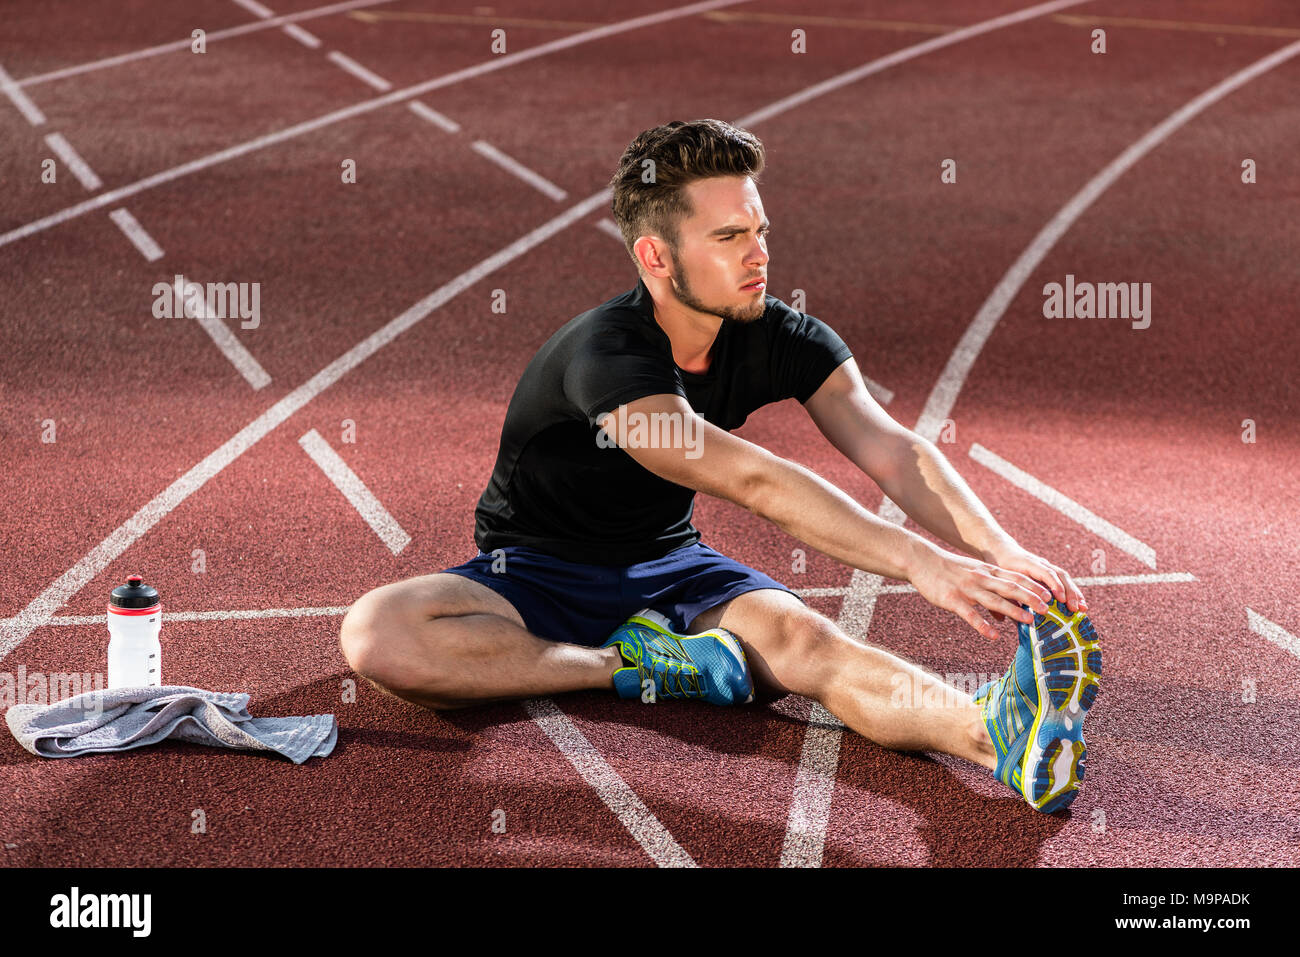 Athlete stretching on racing track before running Stock Photo